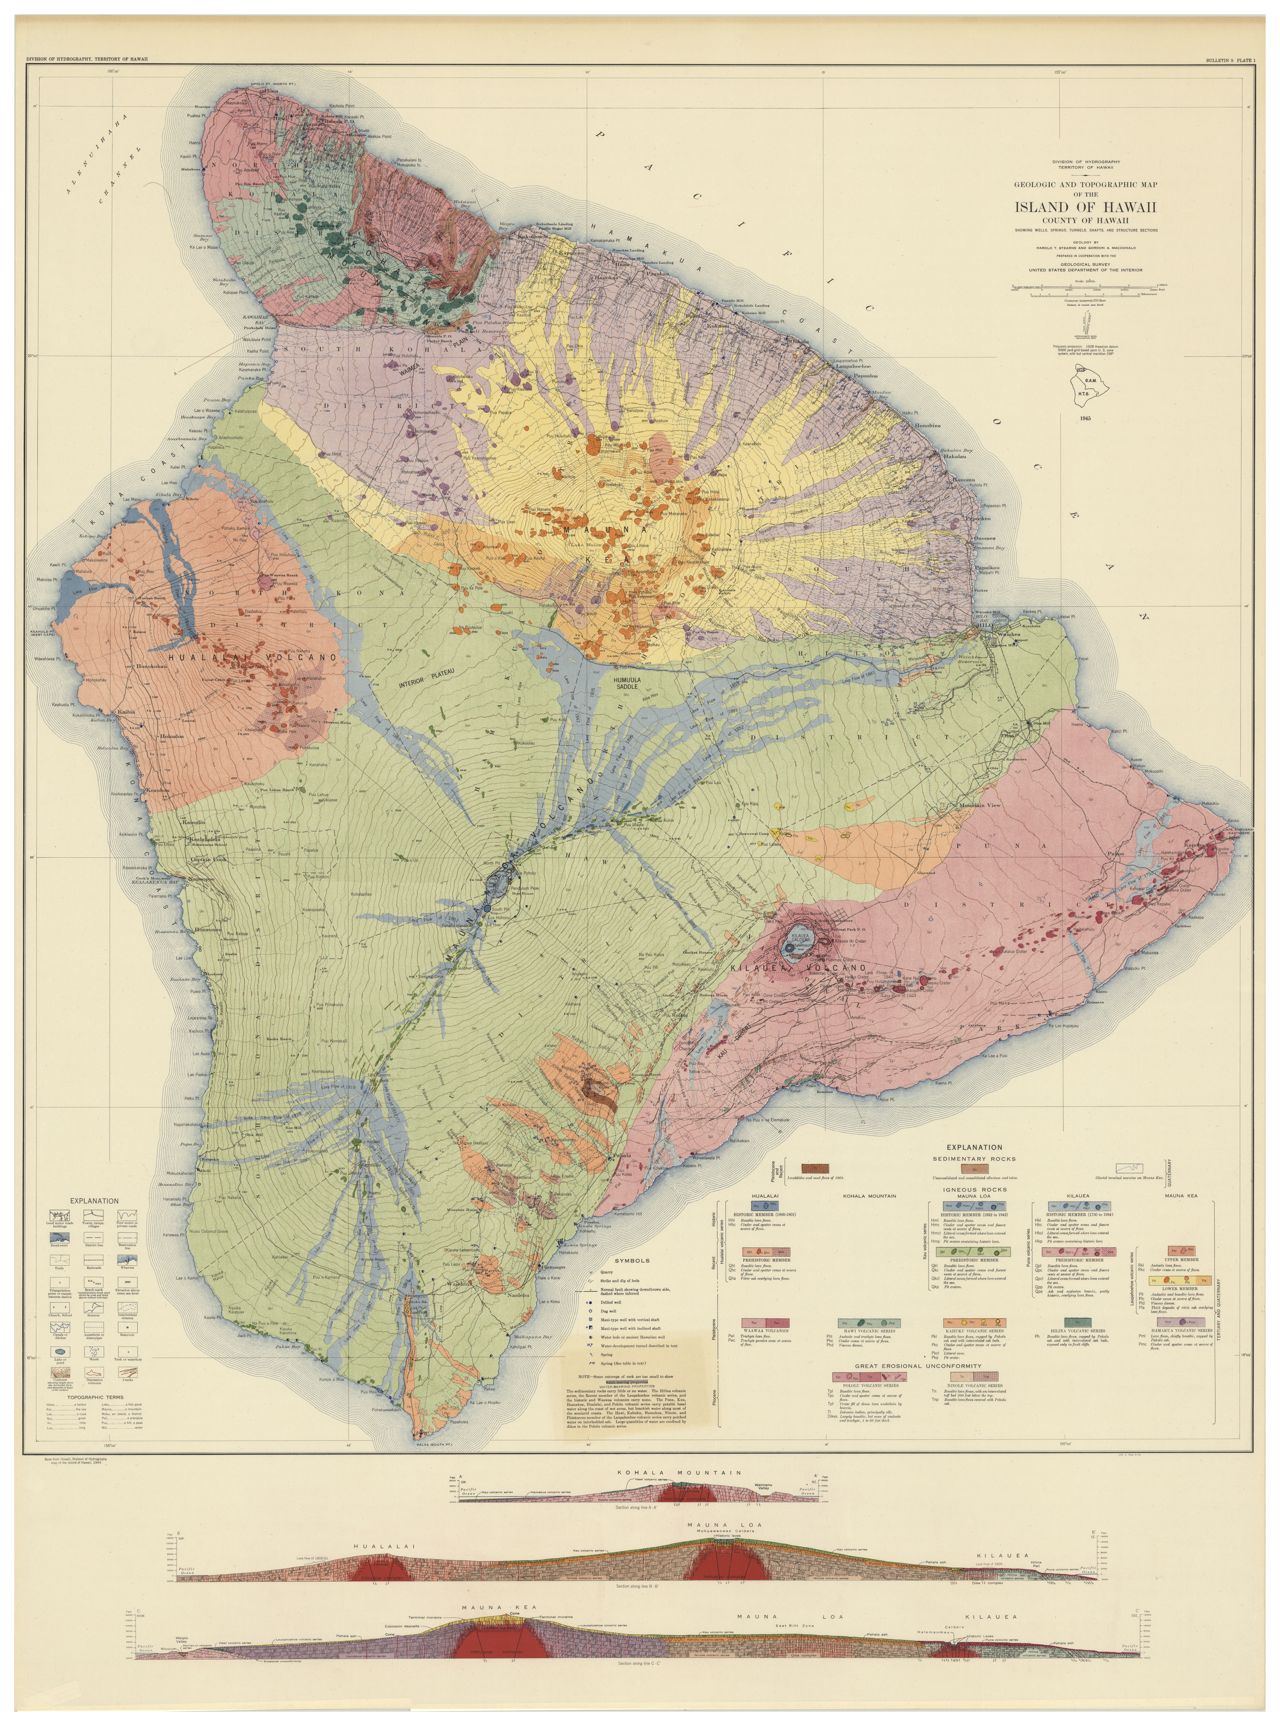 1945 Geologic and Topographic Map of the Island of Hawaii